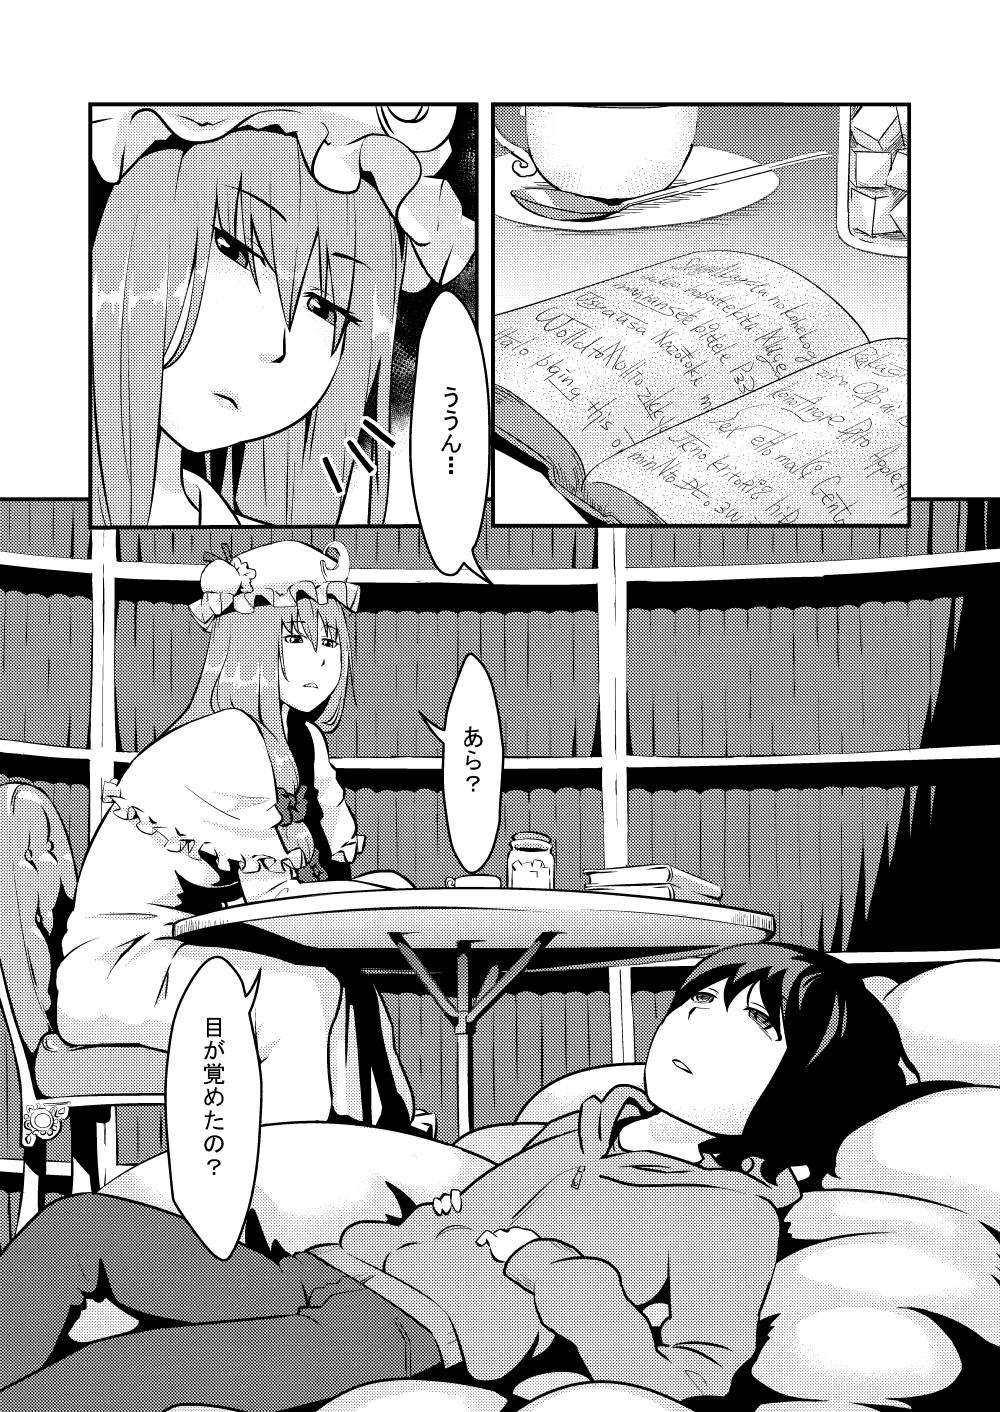 Inked おねしょたパチュリー - Touhou project Hot Couple Sex - Page 1